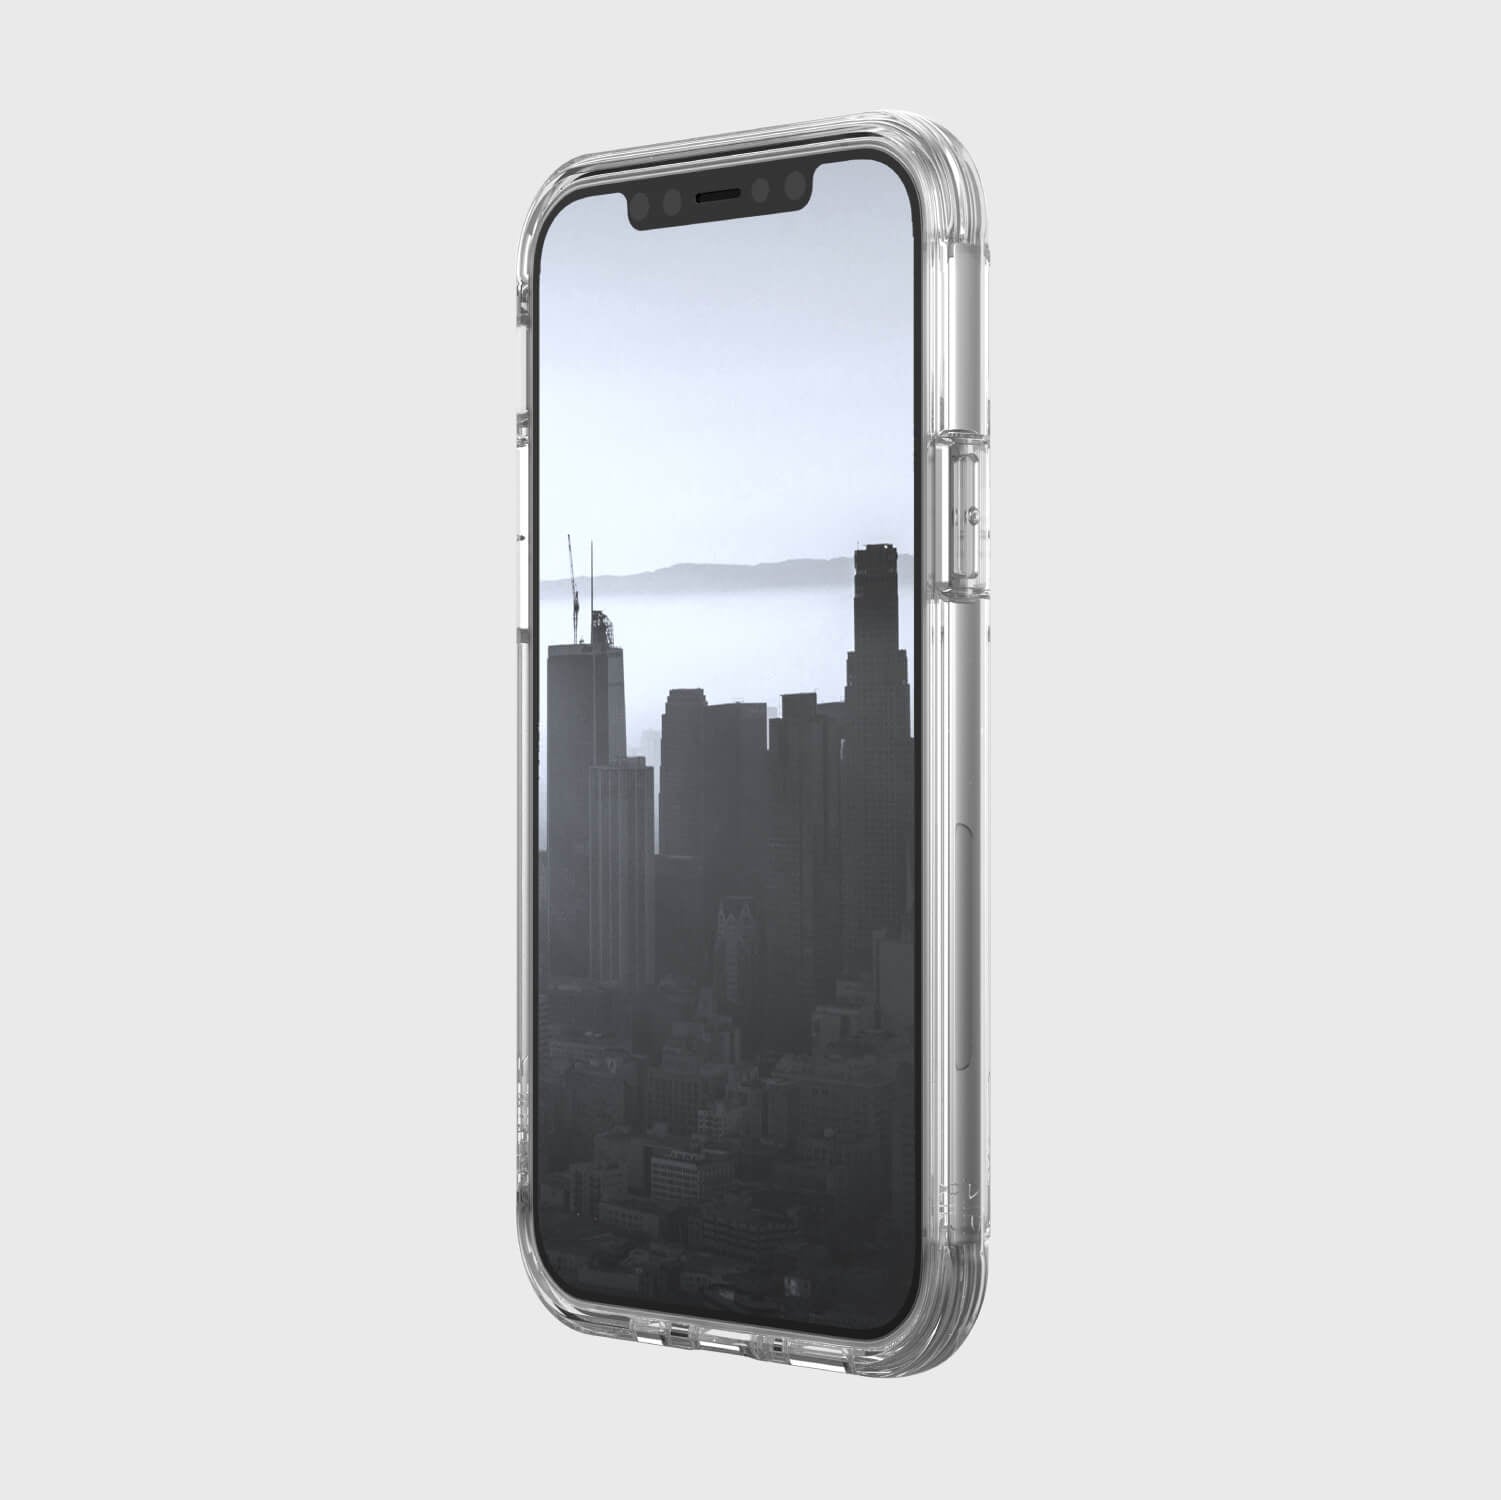 A Raptic iPhone 12 Pro Max Case - AIR with wireless charging compatibility and 4-metre drop protection.